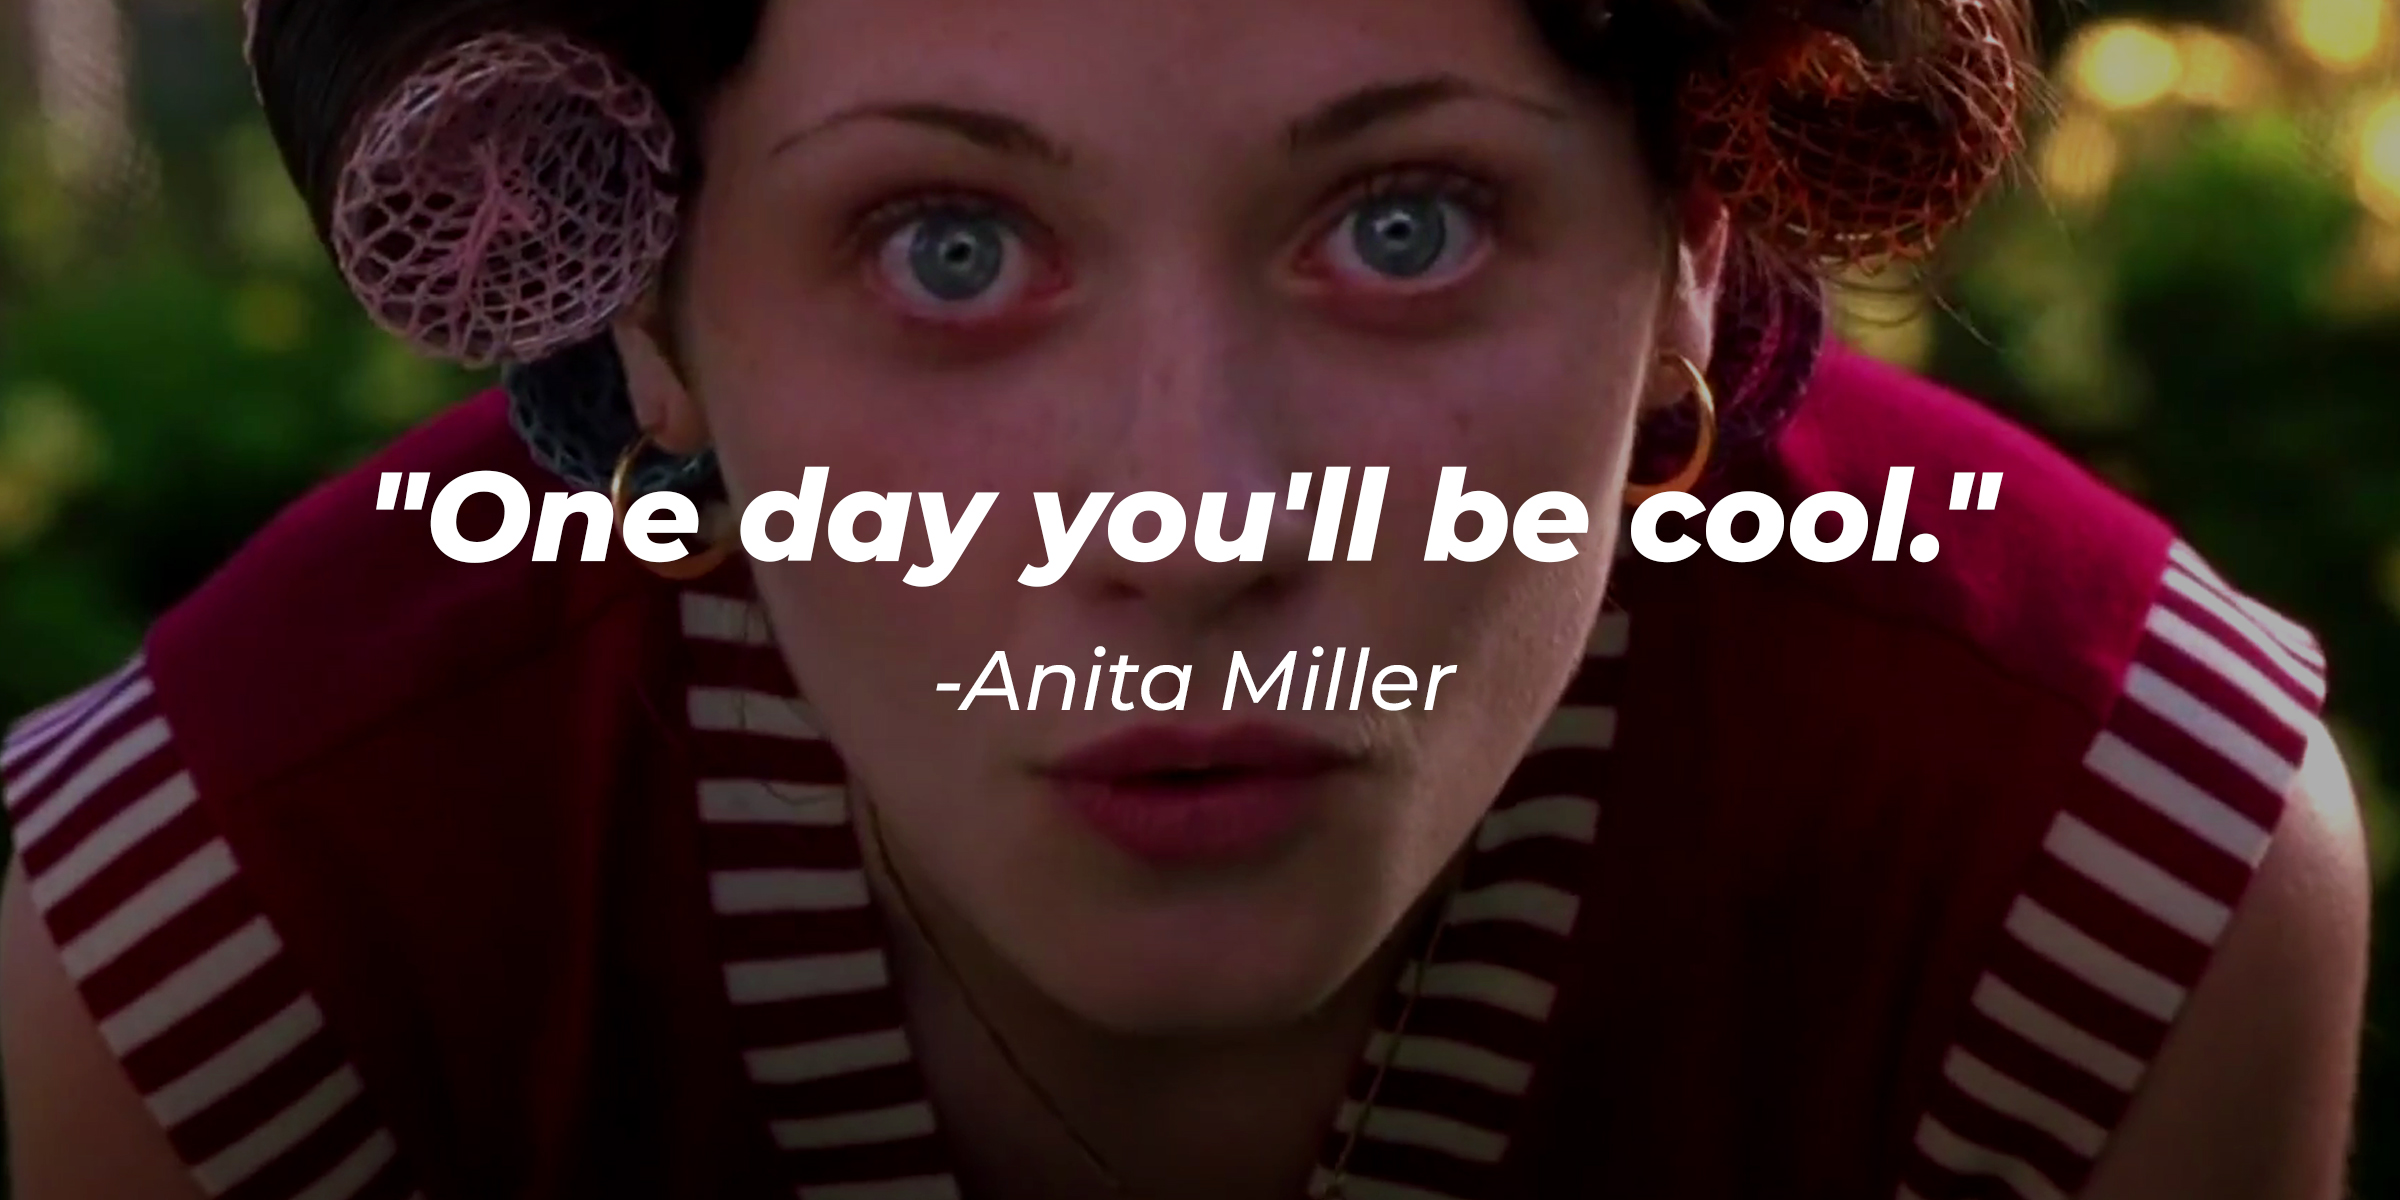 Anita Miller's quote: "One day you'll be cool." | Source: Facebook/AlmostFamousTheMovie